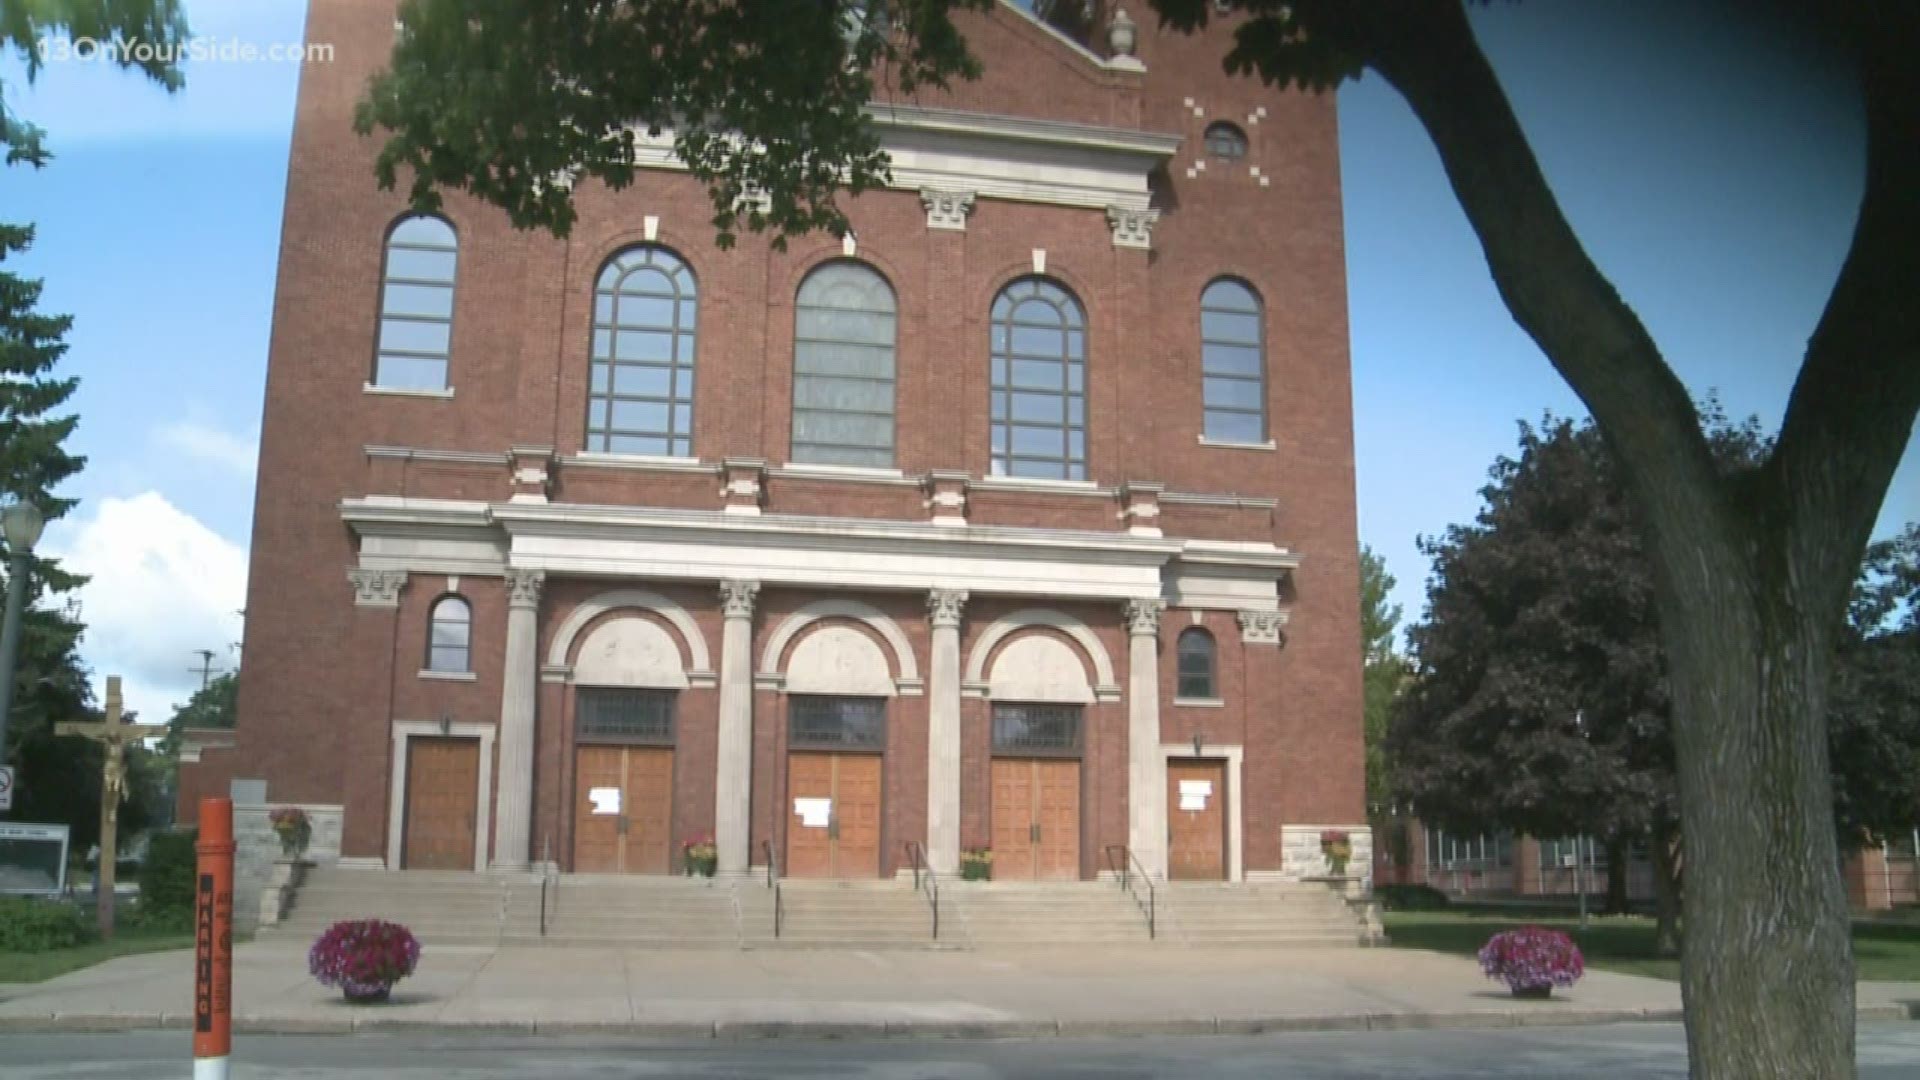 Door slamming prompts 911 call about shots fired at GR church